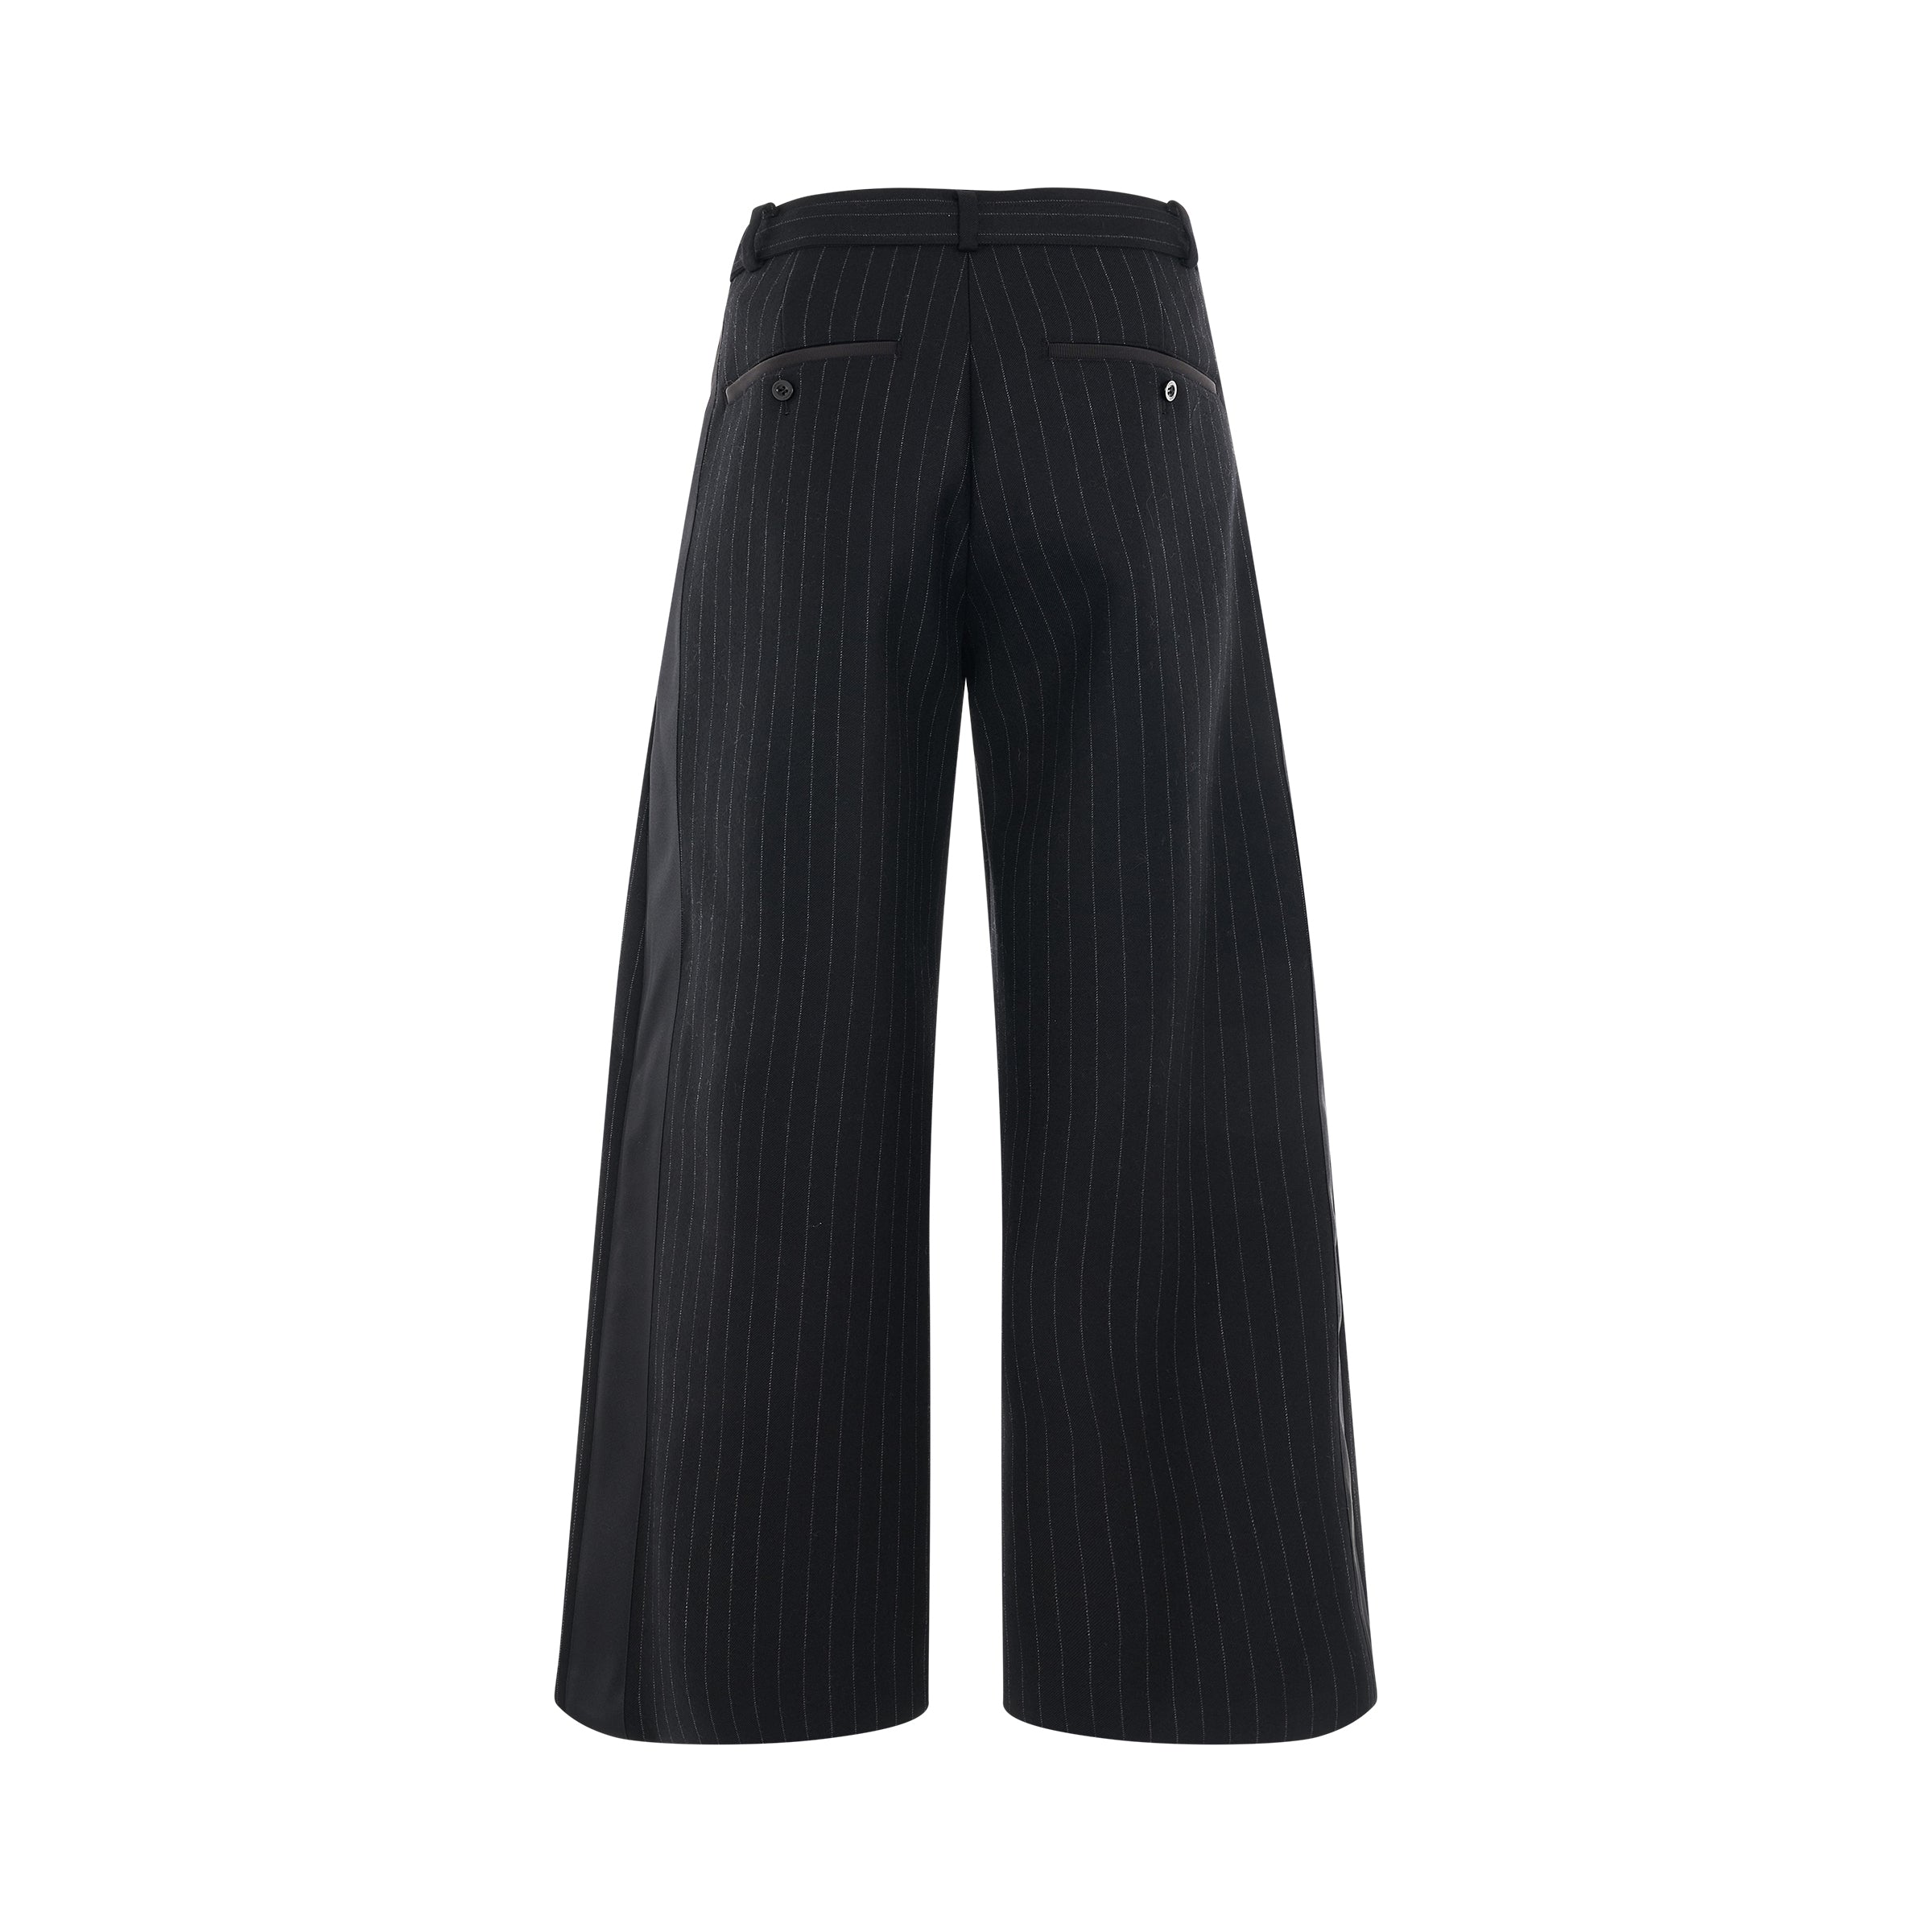 sacai chalk stripe bonding pants in black sold out sold out sale earn ...